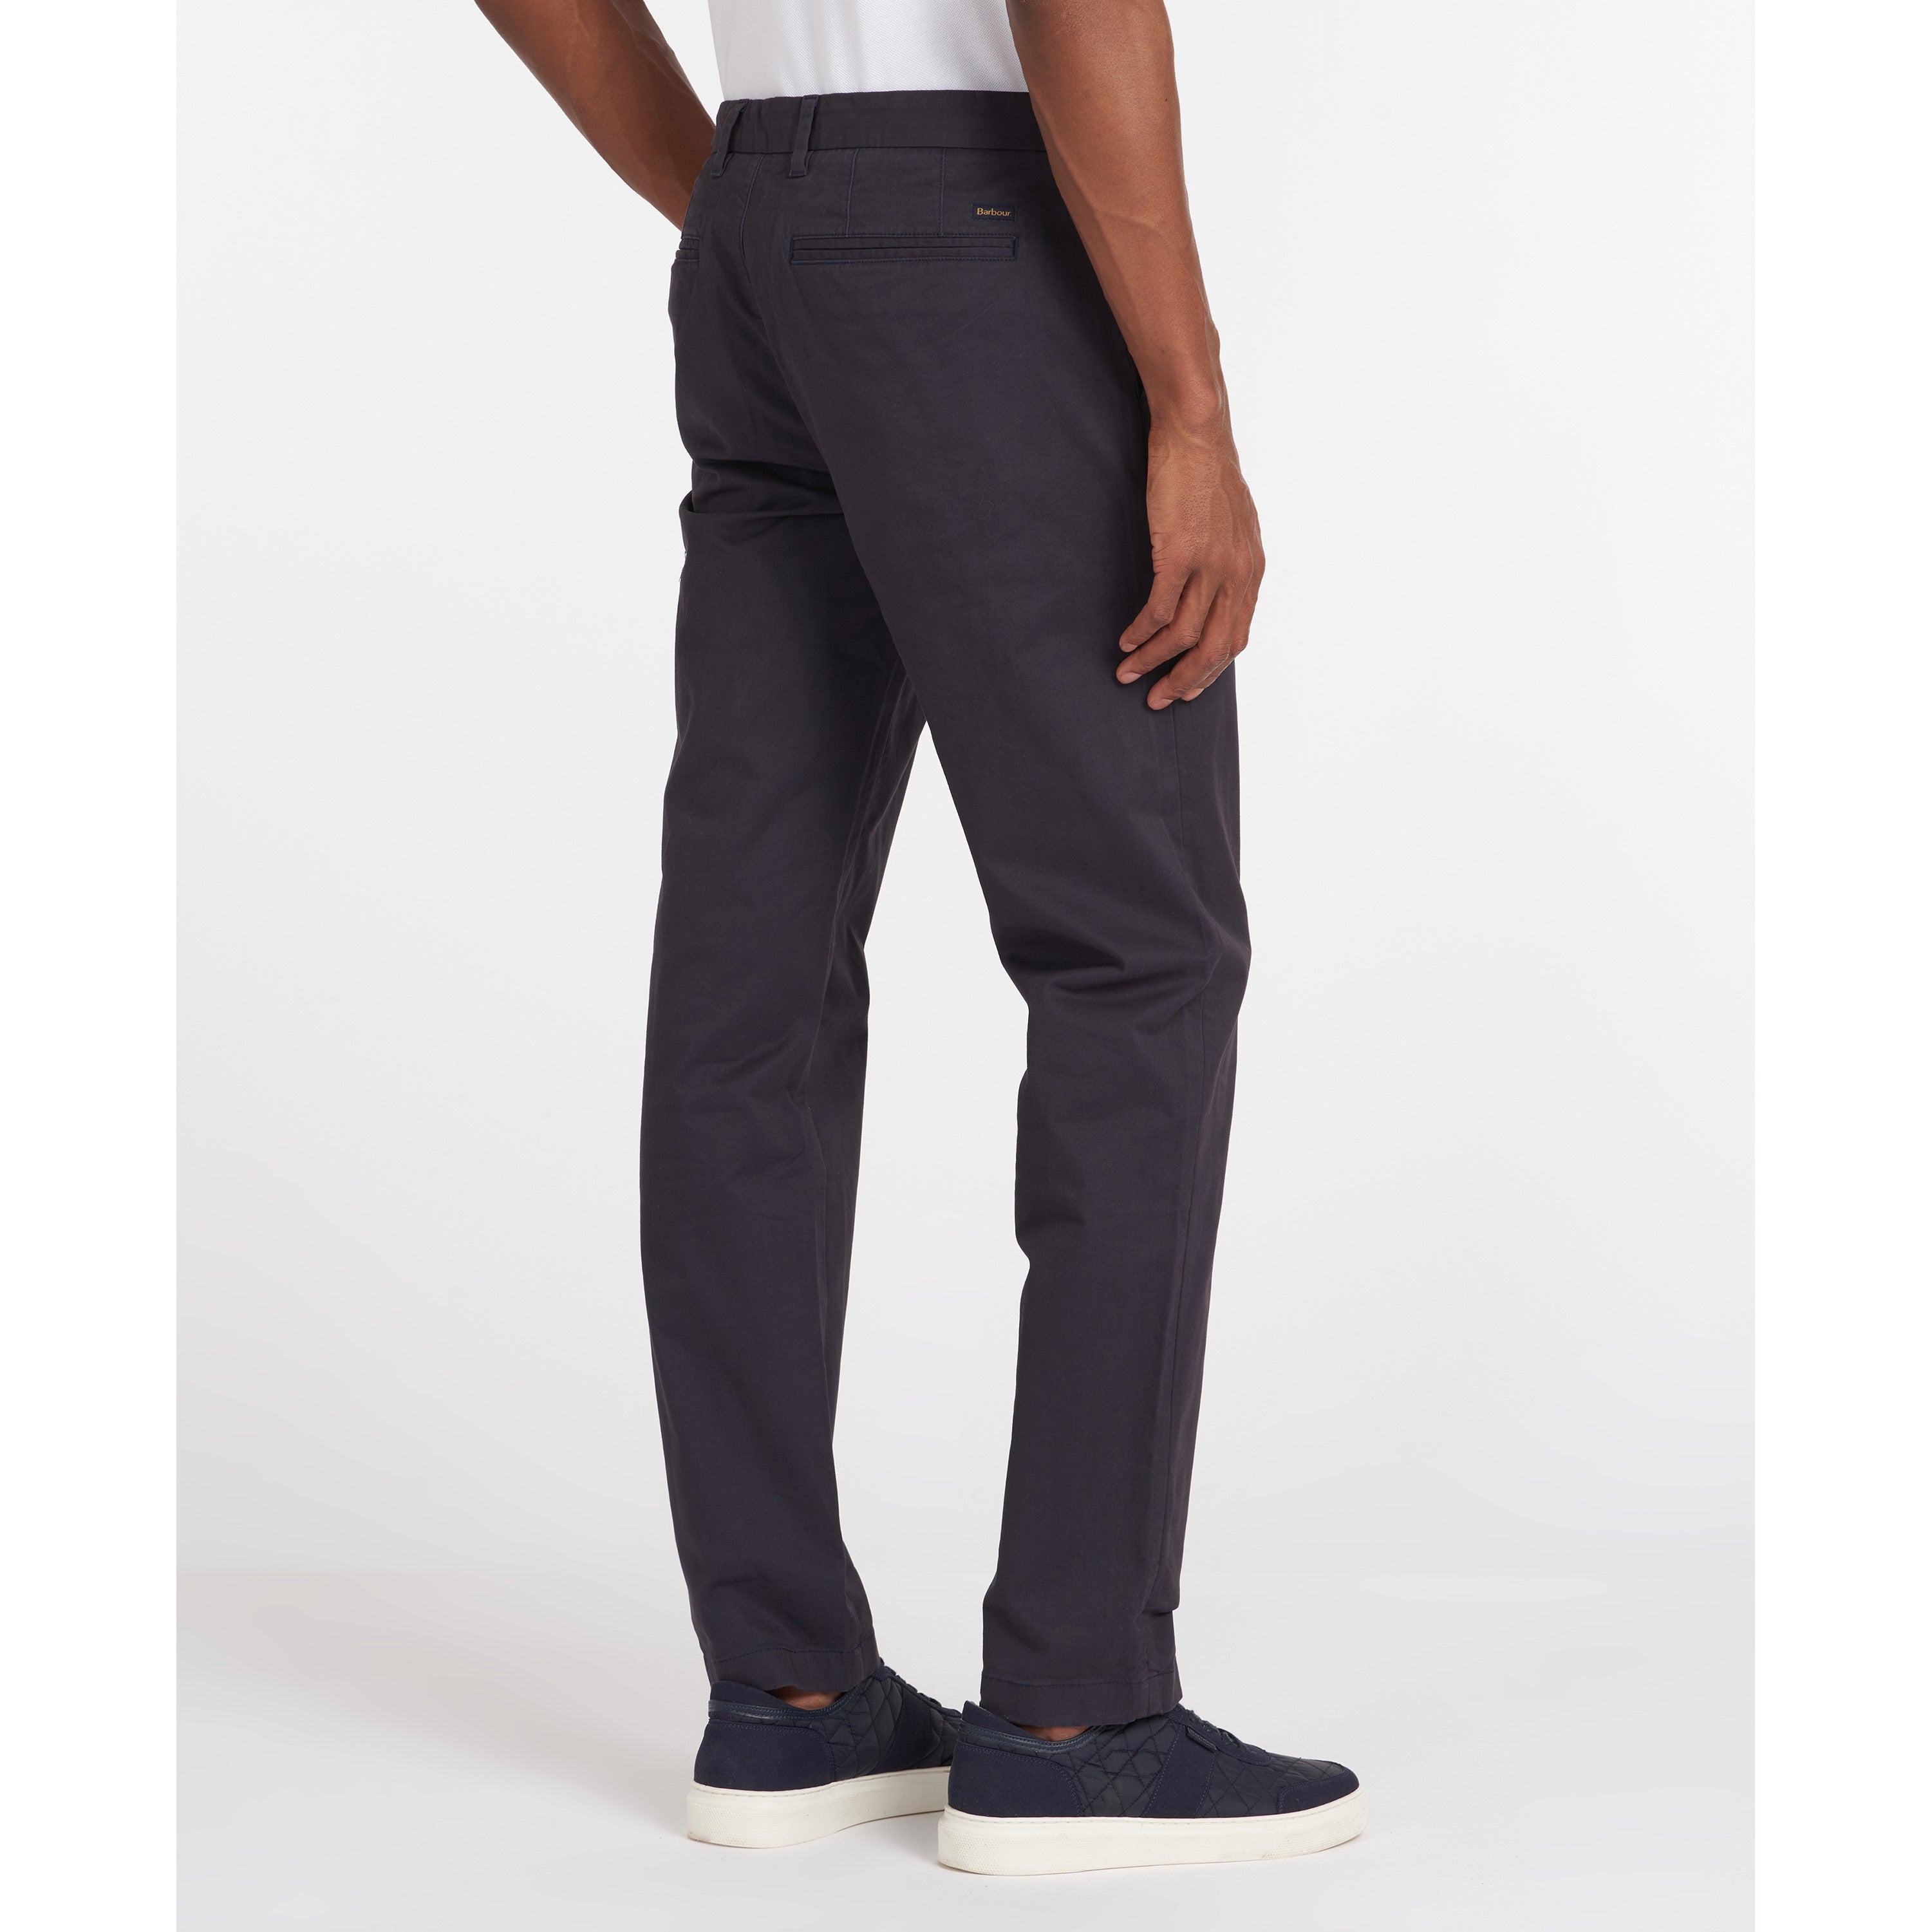 Barbour Neuston Essential Mens Chino Trousers - Navy